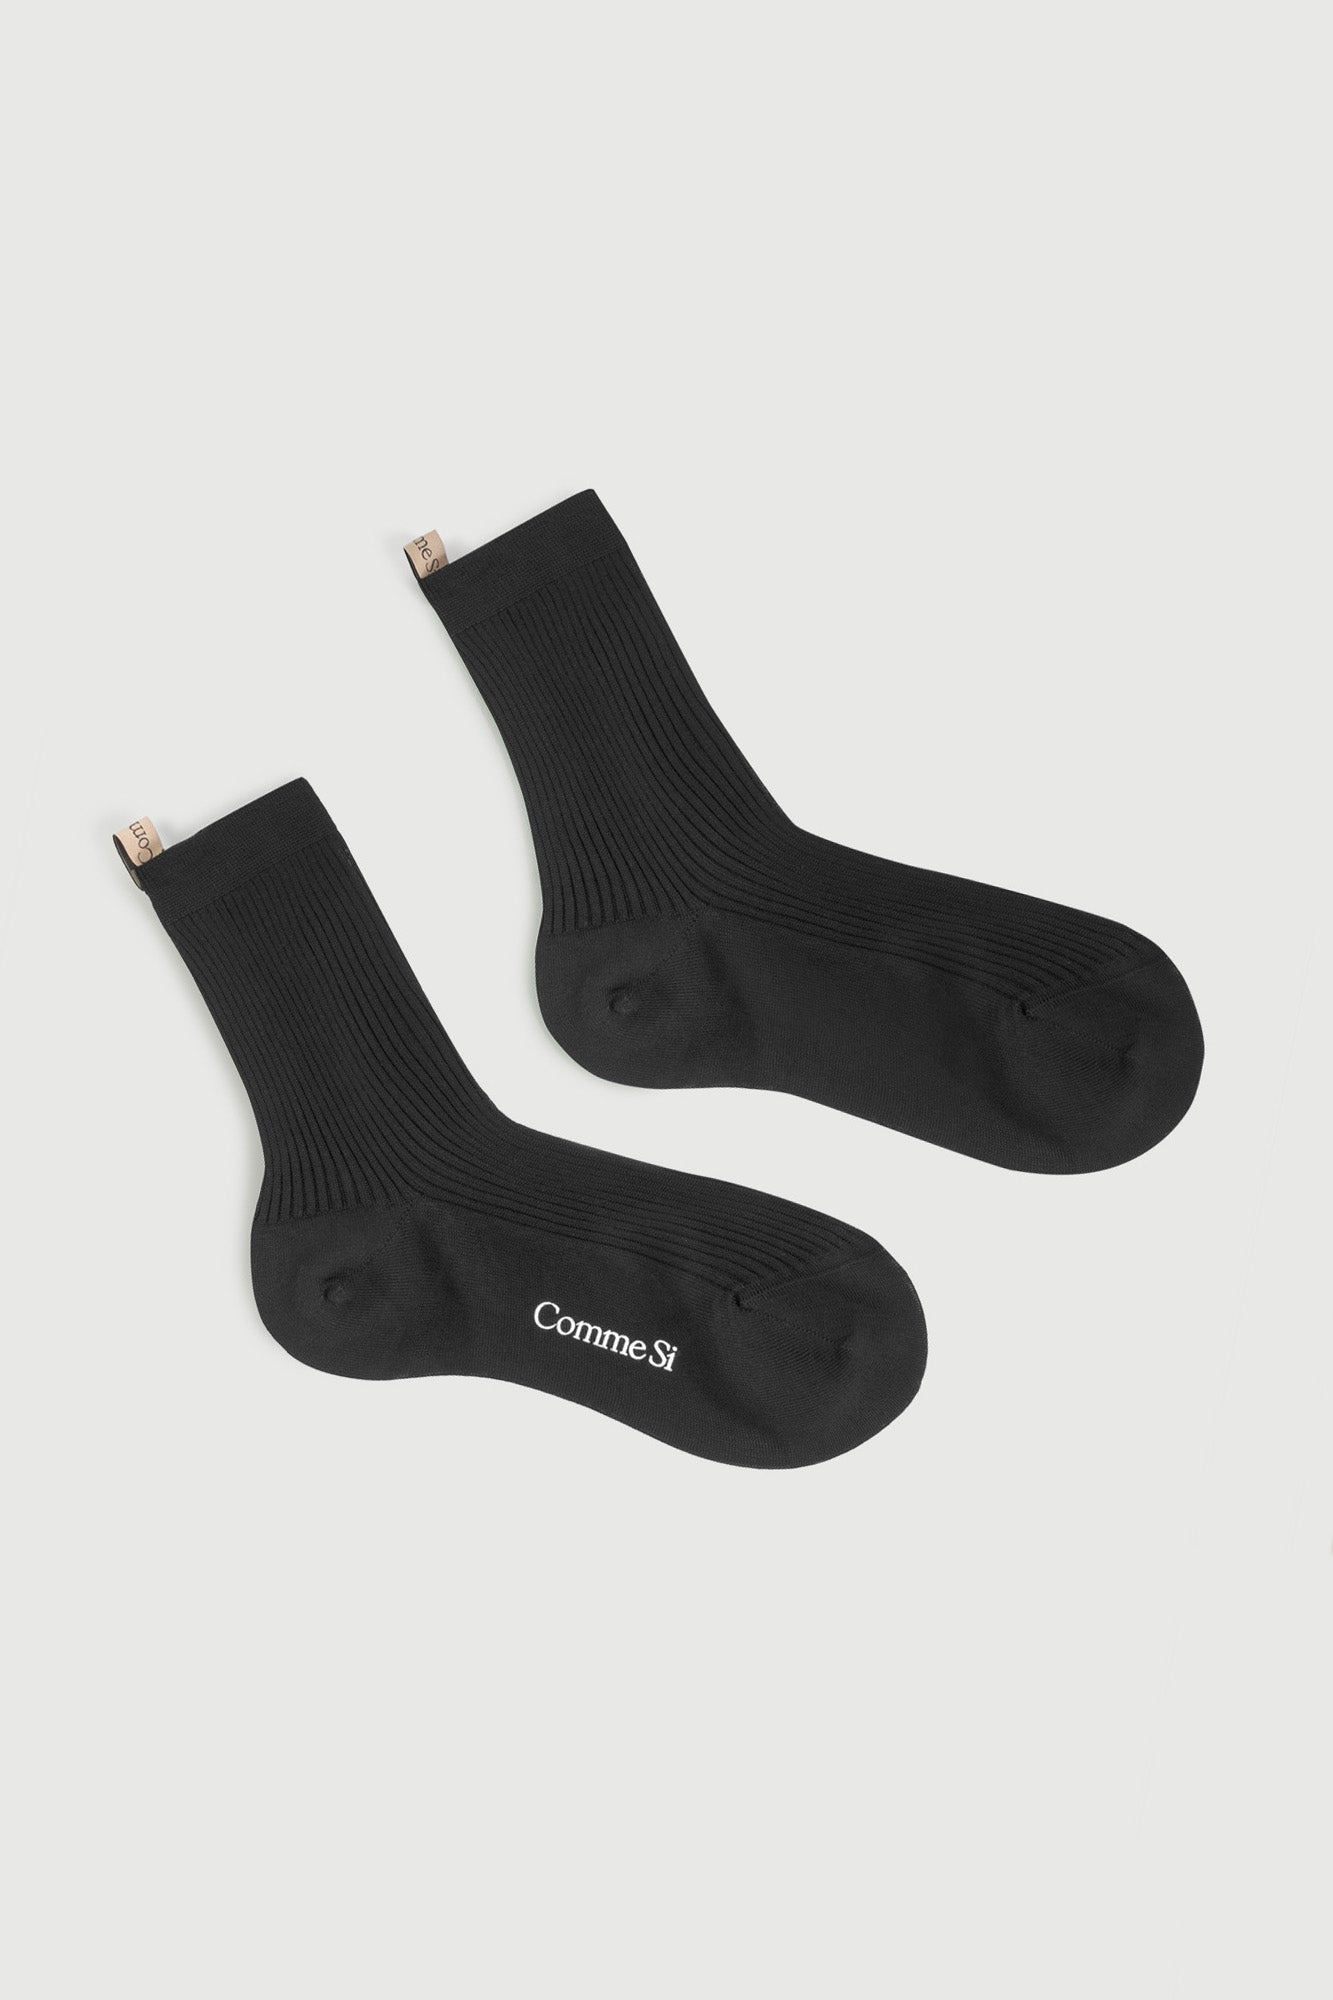 The Agnelli Sock in Black, Egyptian Cotton